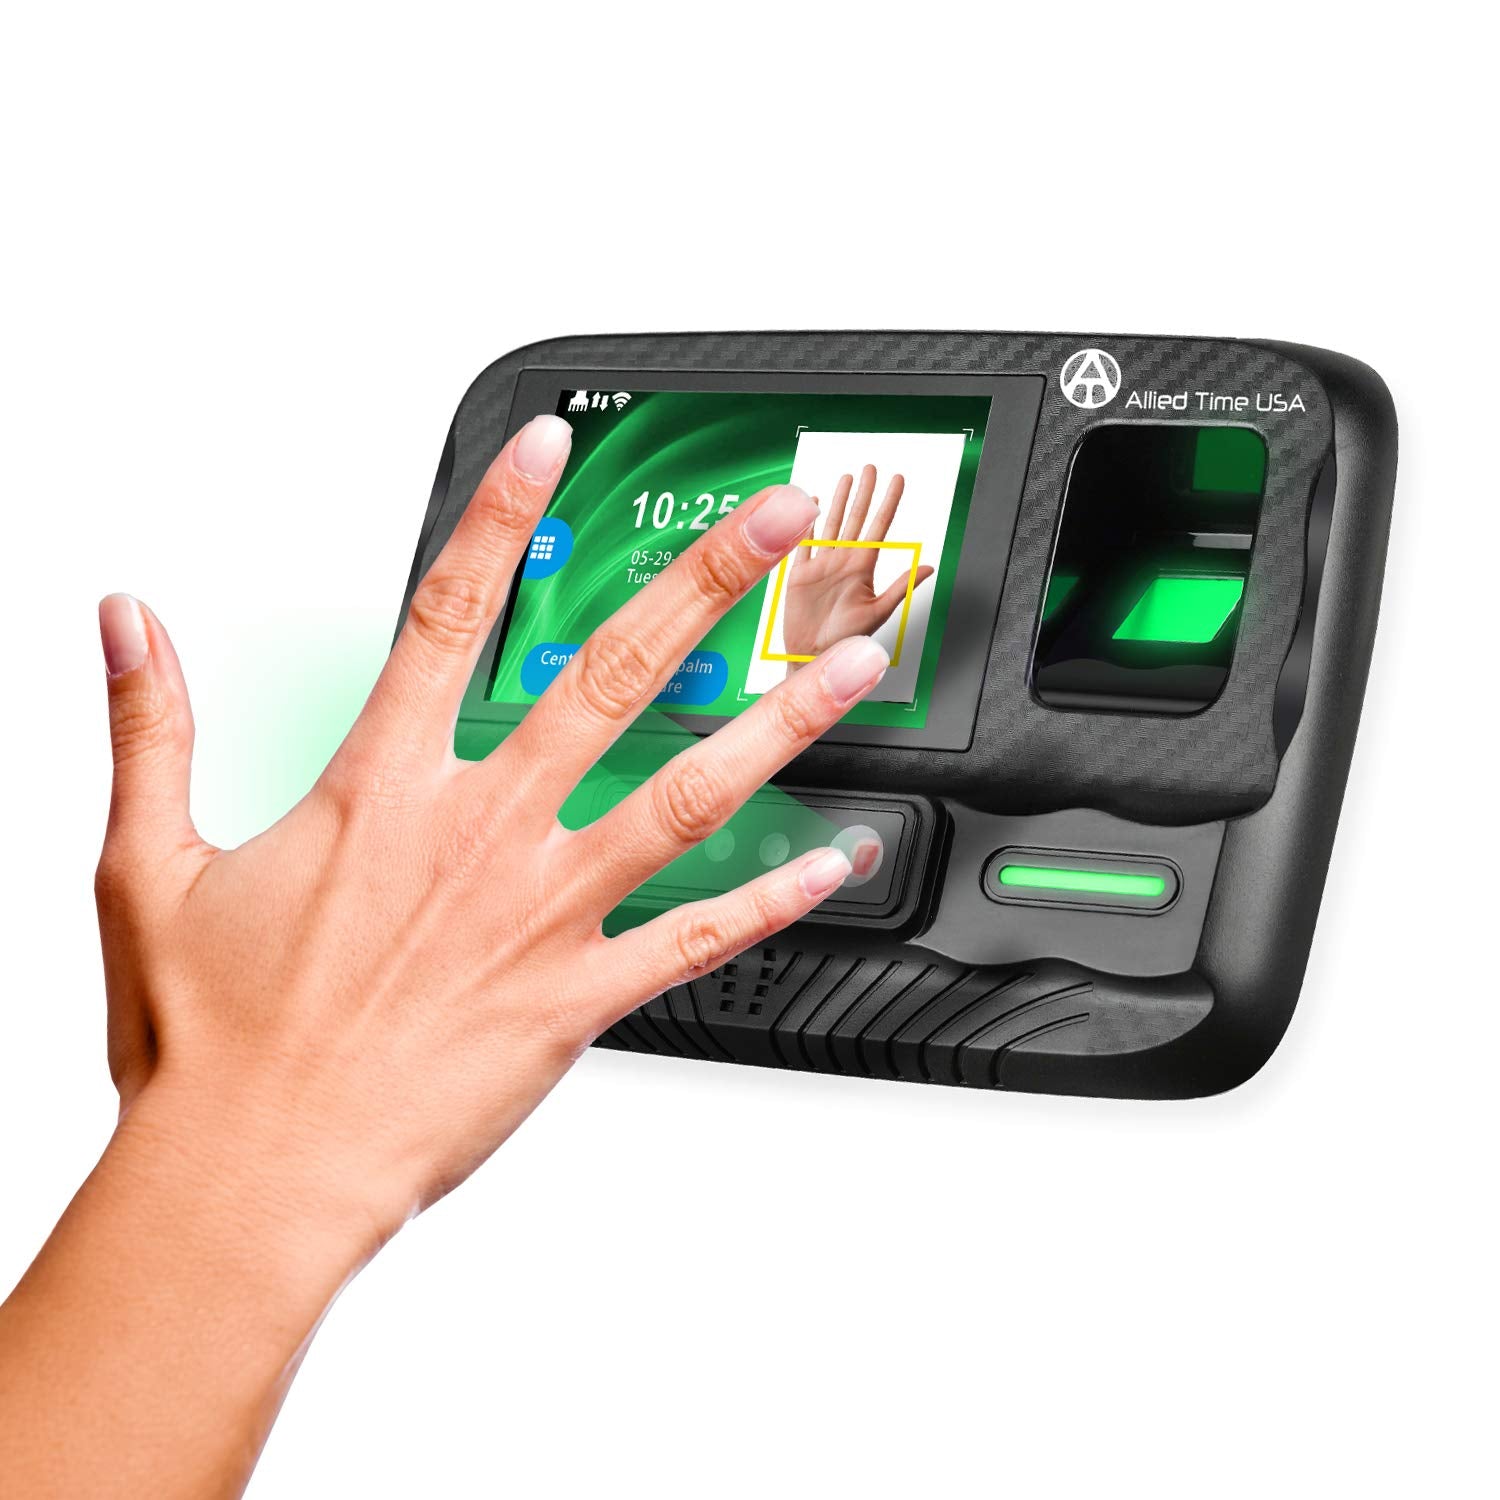 Biometric Employee Time Clock with Online Reporting - Face, Palm, Finger, Badge, WiFi Ready (#CB4000)